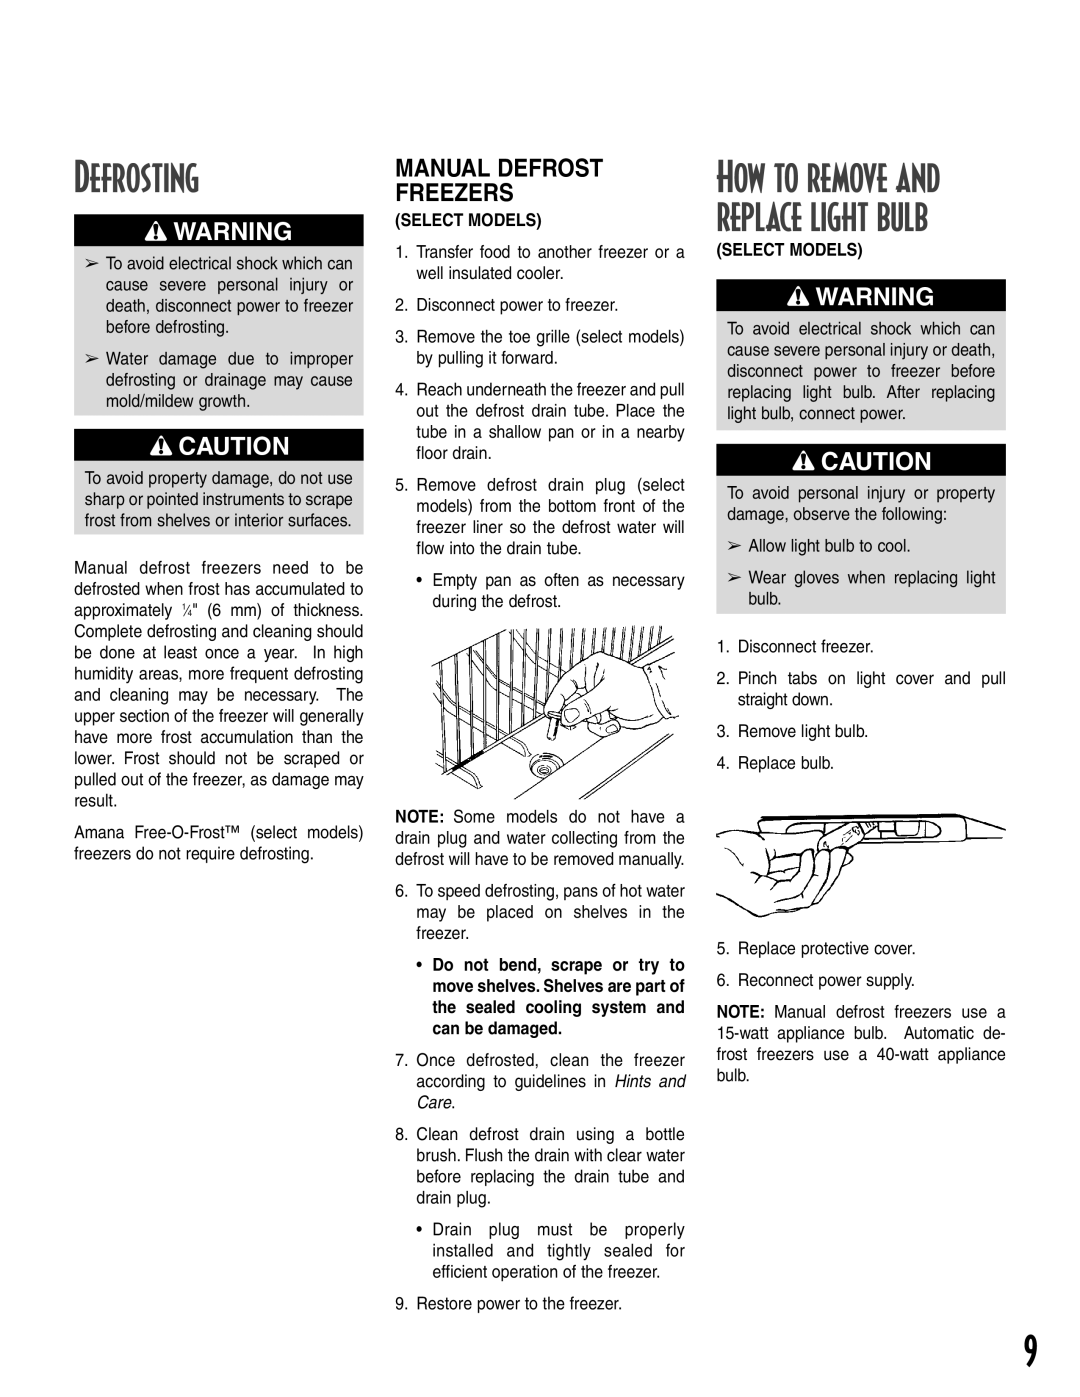 Amana 1-82034-002 owner manual Defrosting, How to remove and replace light bulb, Manual Defrost Freezers, Select Models 